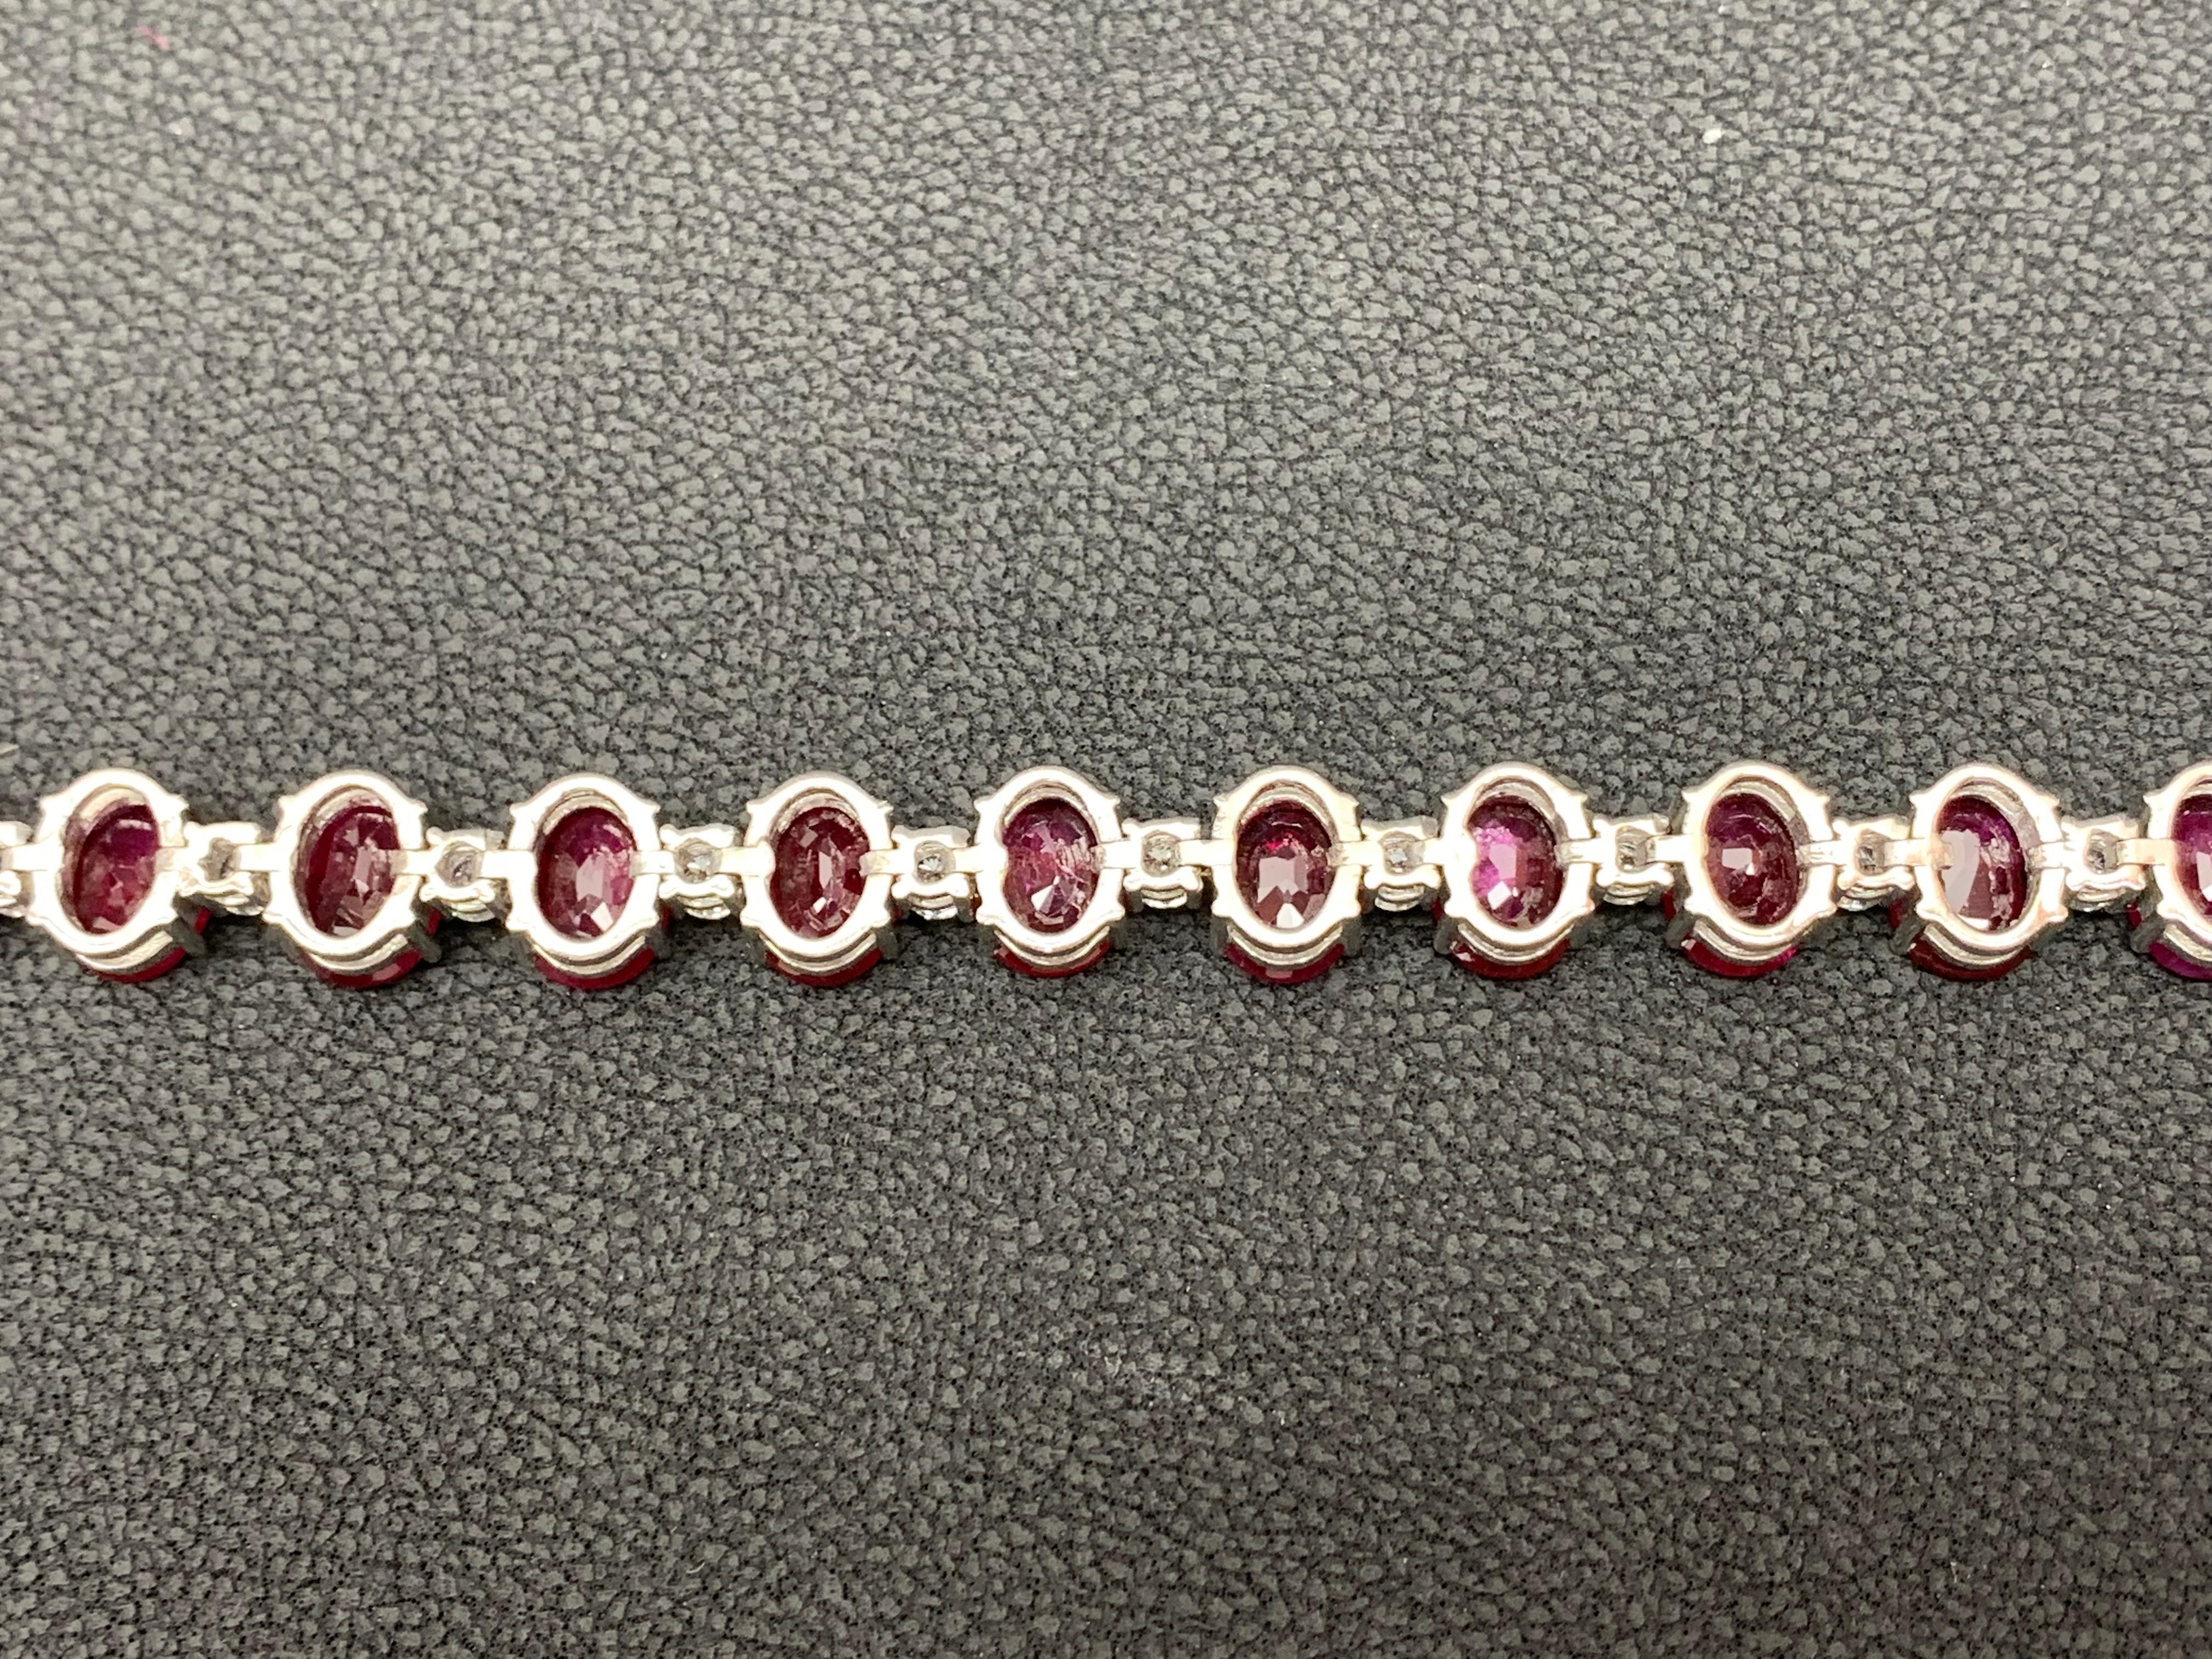 25.46 Carat Oval Cut Ruby and Diamond Tennis Bracelet in 14K White Gold For Sale 1